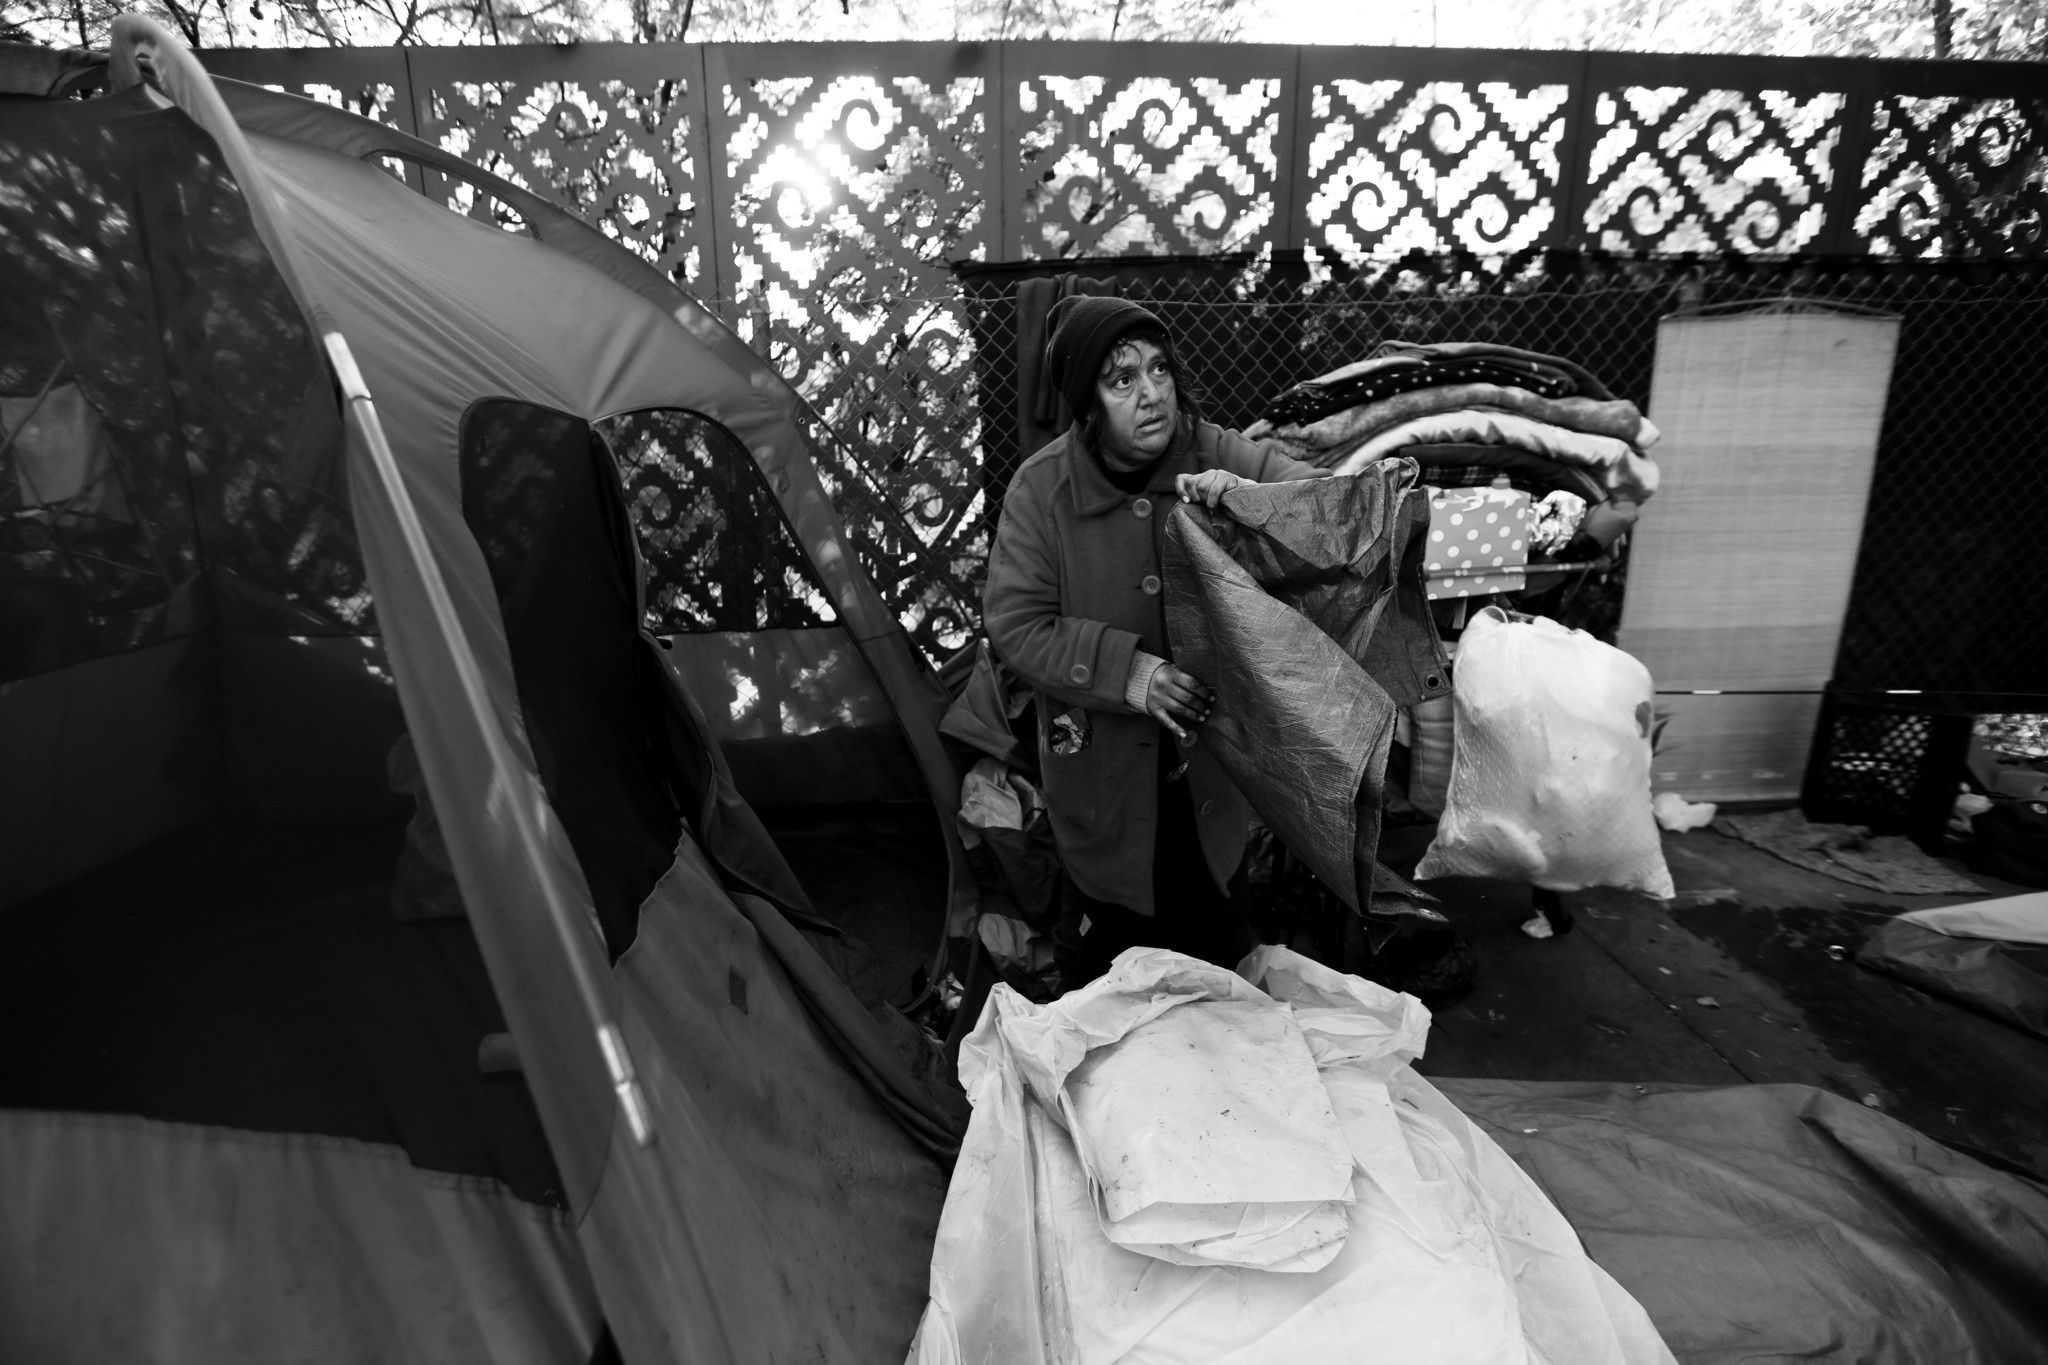 LOS ANGELES, CA FEBRUARY 13, 2017: Angel Barros, 48, packs up her tent in preparation for sidewa